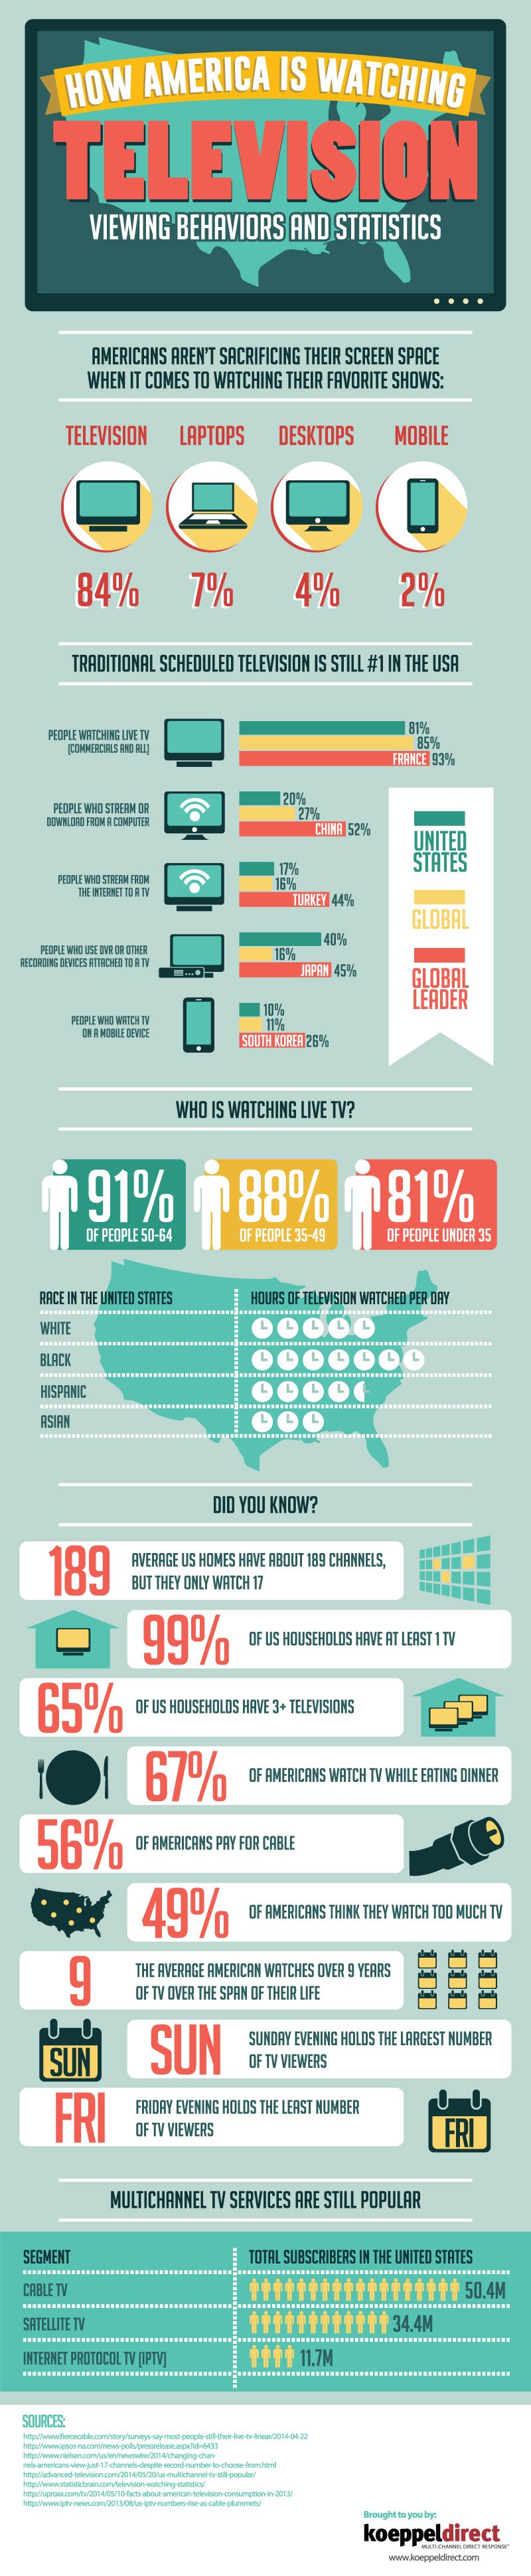 How America is Watching Television infographic